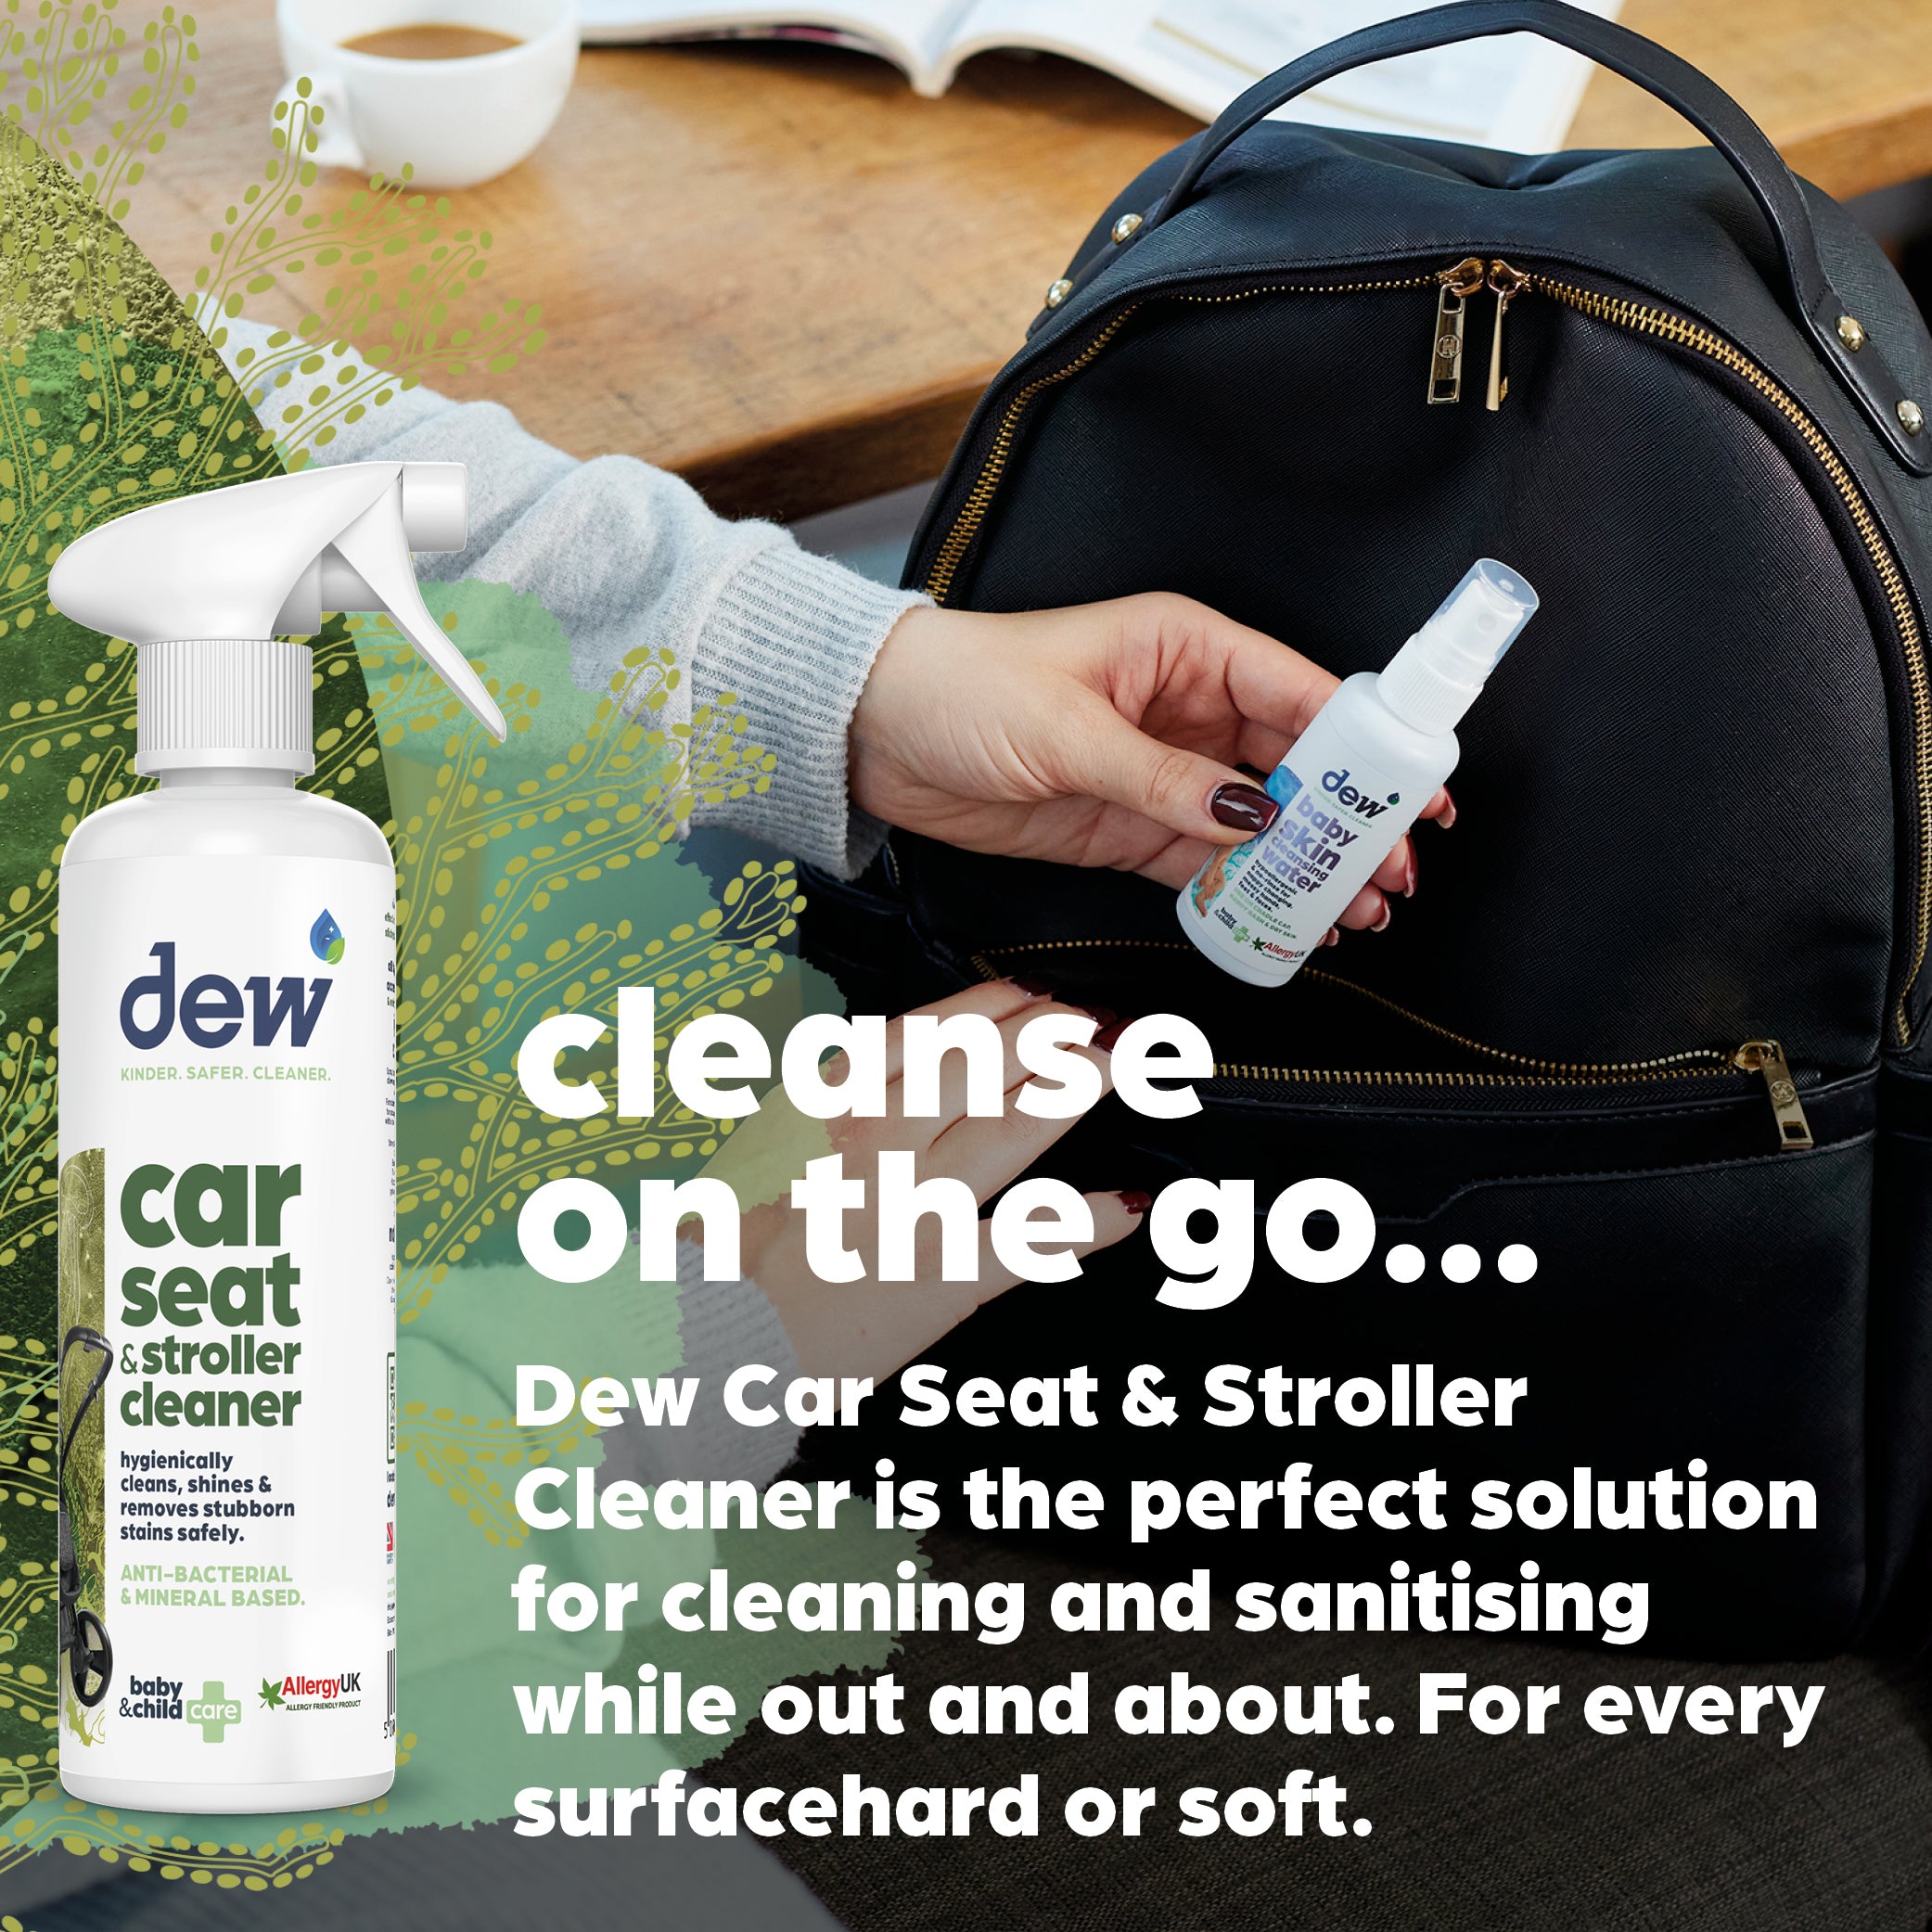 Car Seat & Stroller Cleaner - Cleanse On The Go...